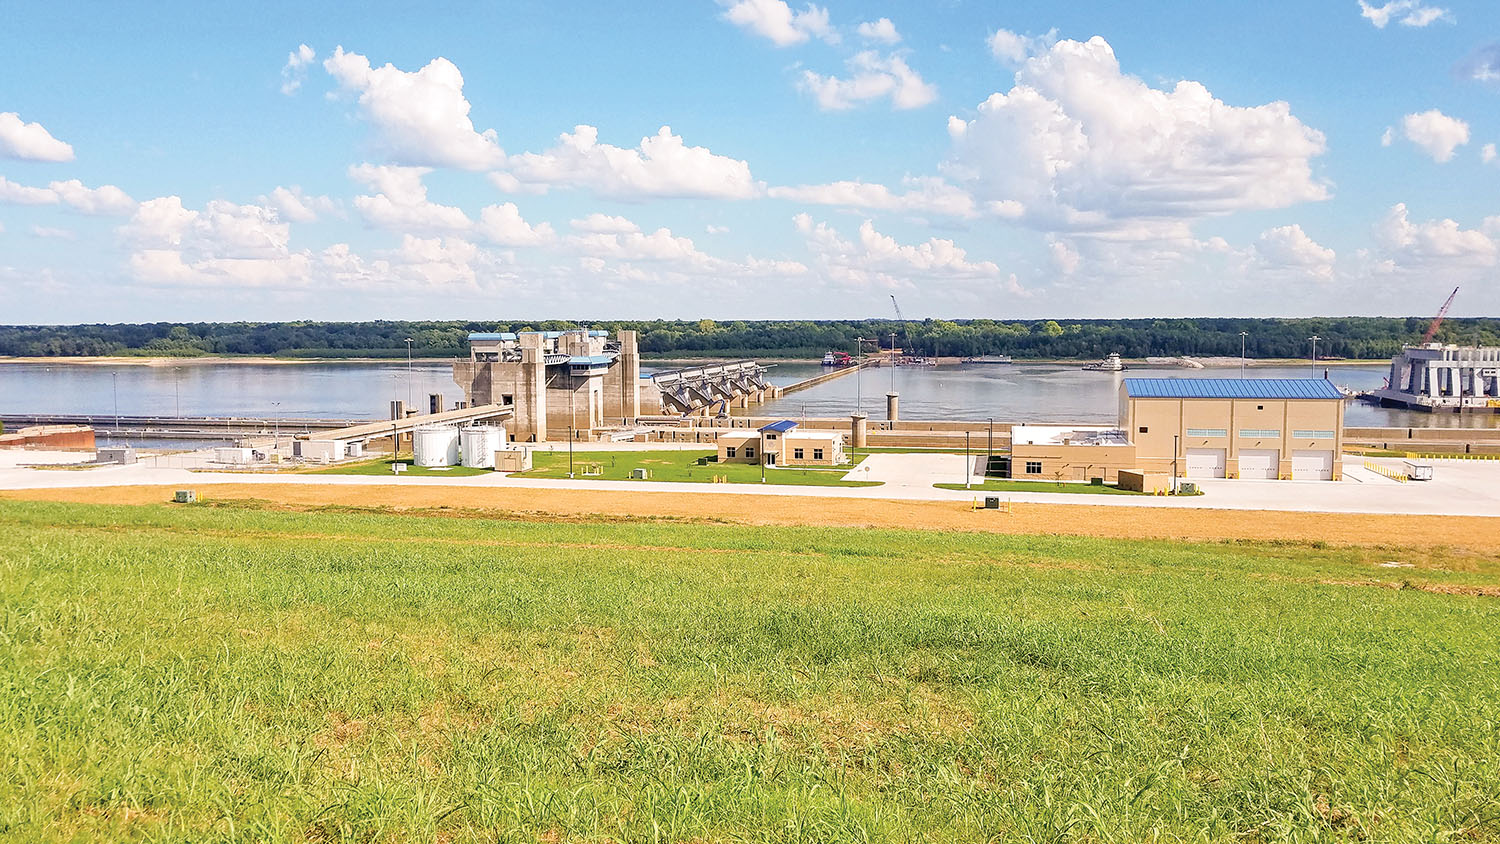 The $3 billion Olmsted Locks and Dam became fully operational in August 2018. The Louisville district of the U.S. Army Corps of Engineers recently won a top 10 national award from the American Society of Civil Engineers for the project.